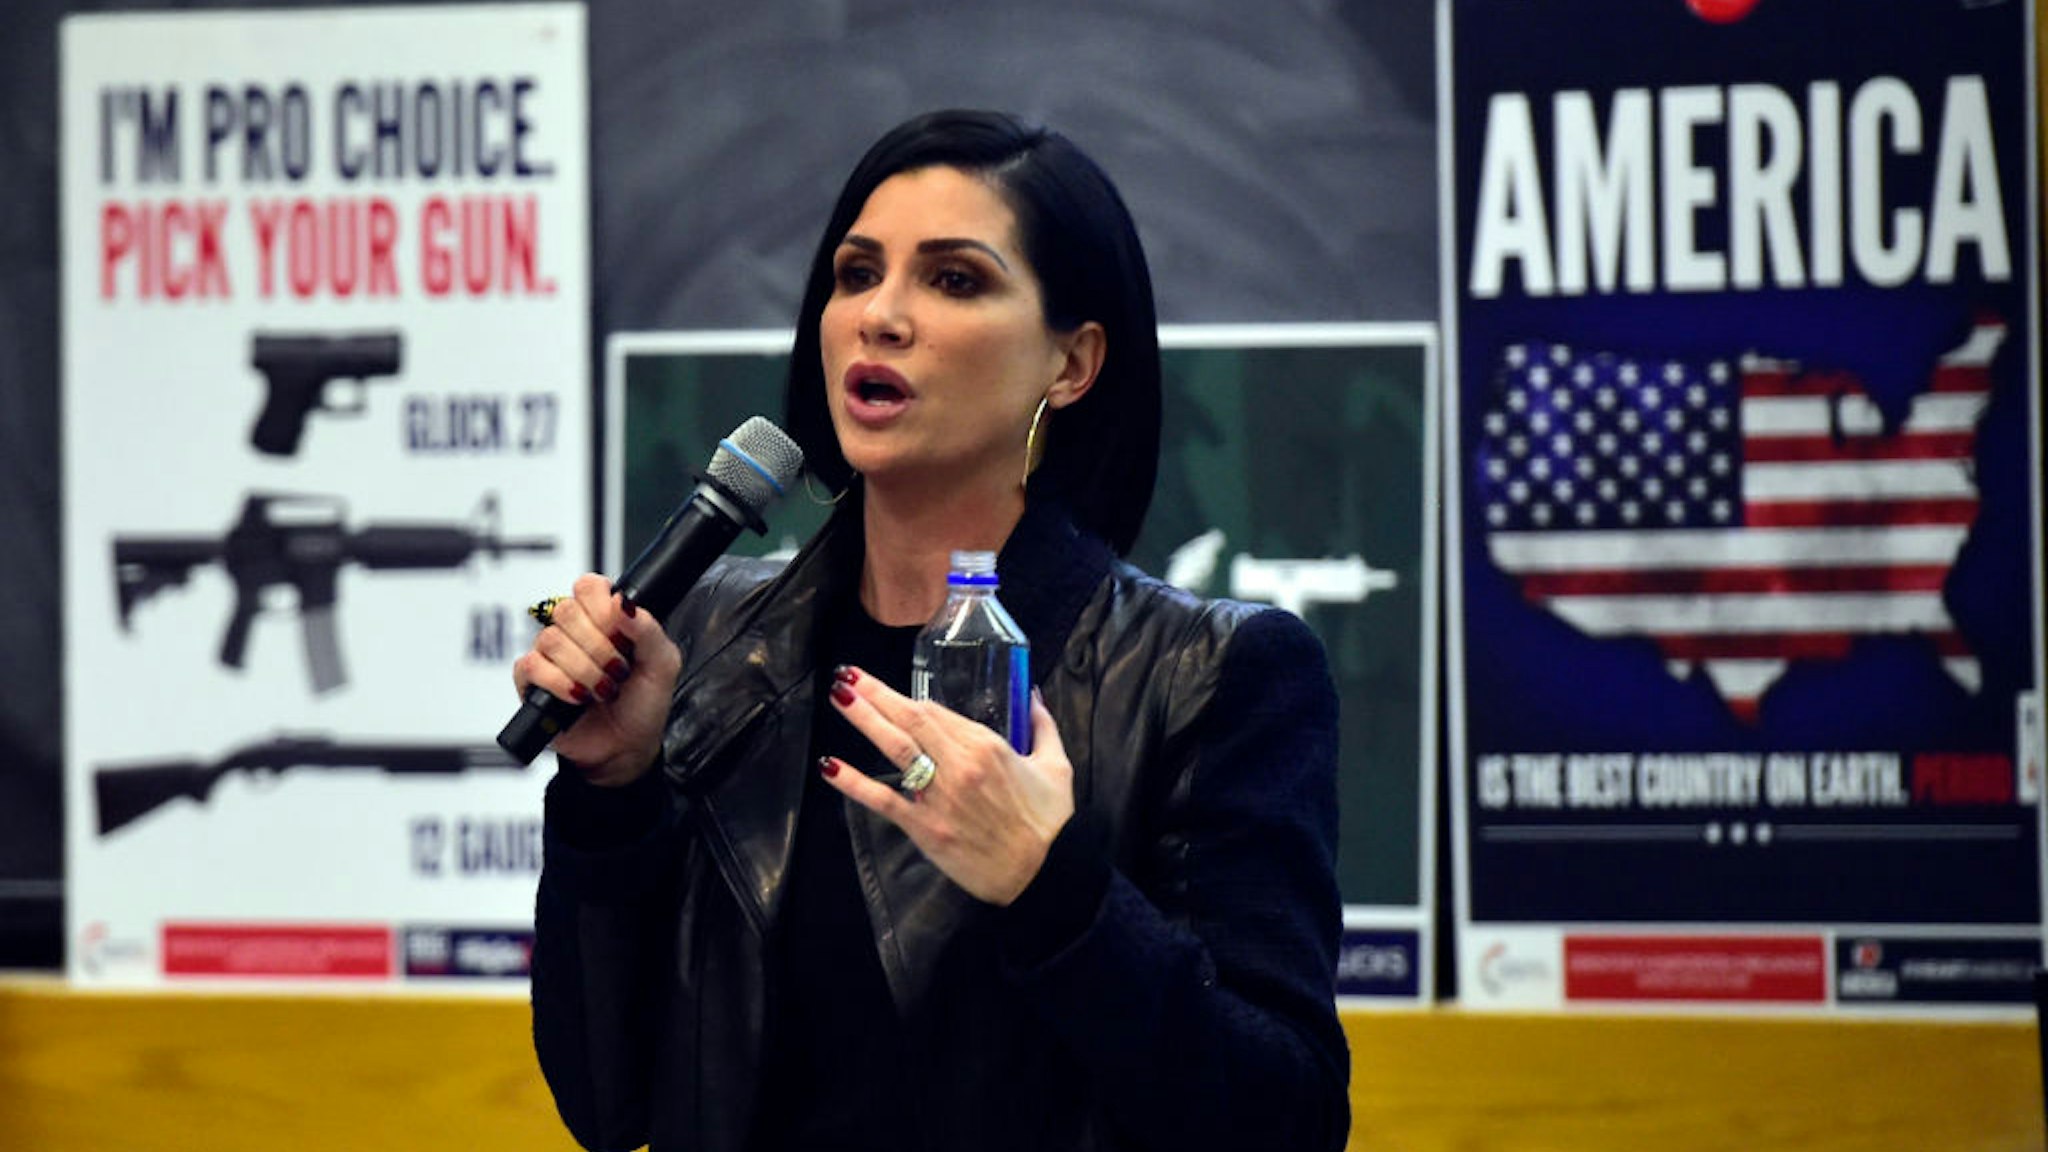 BOULDER, CO - OCT 10, 2019: Former National Rifle Association spokesperson Dana Loesch speaks about saving the Second Amendment during a event on Thursday on the University of Colorado campus in Boulder. (Photo by Jeremy Papasso/Staff Photographer)